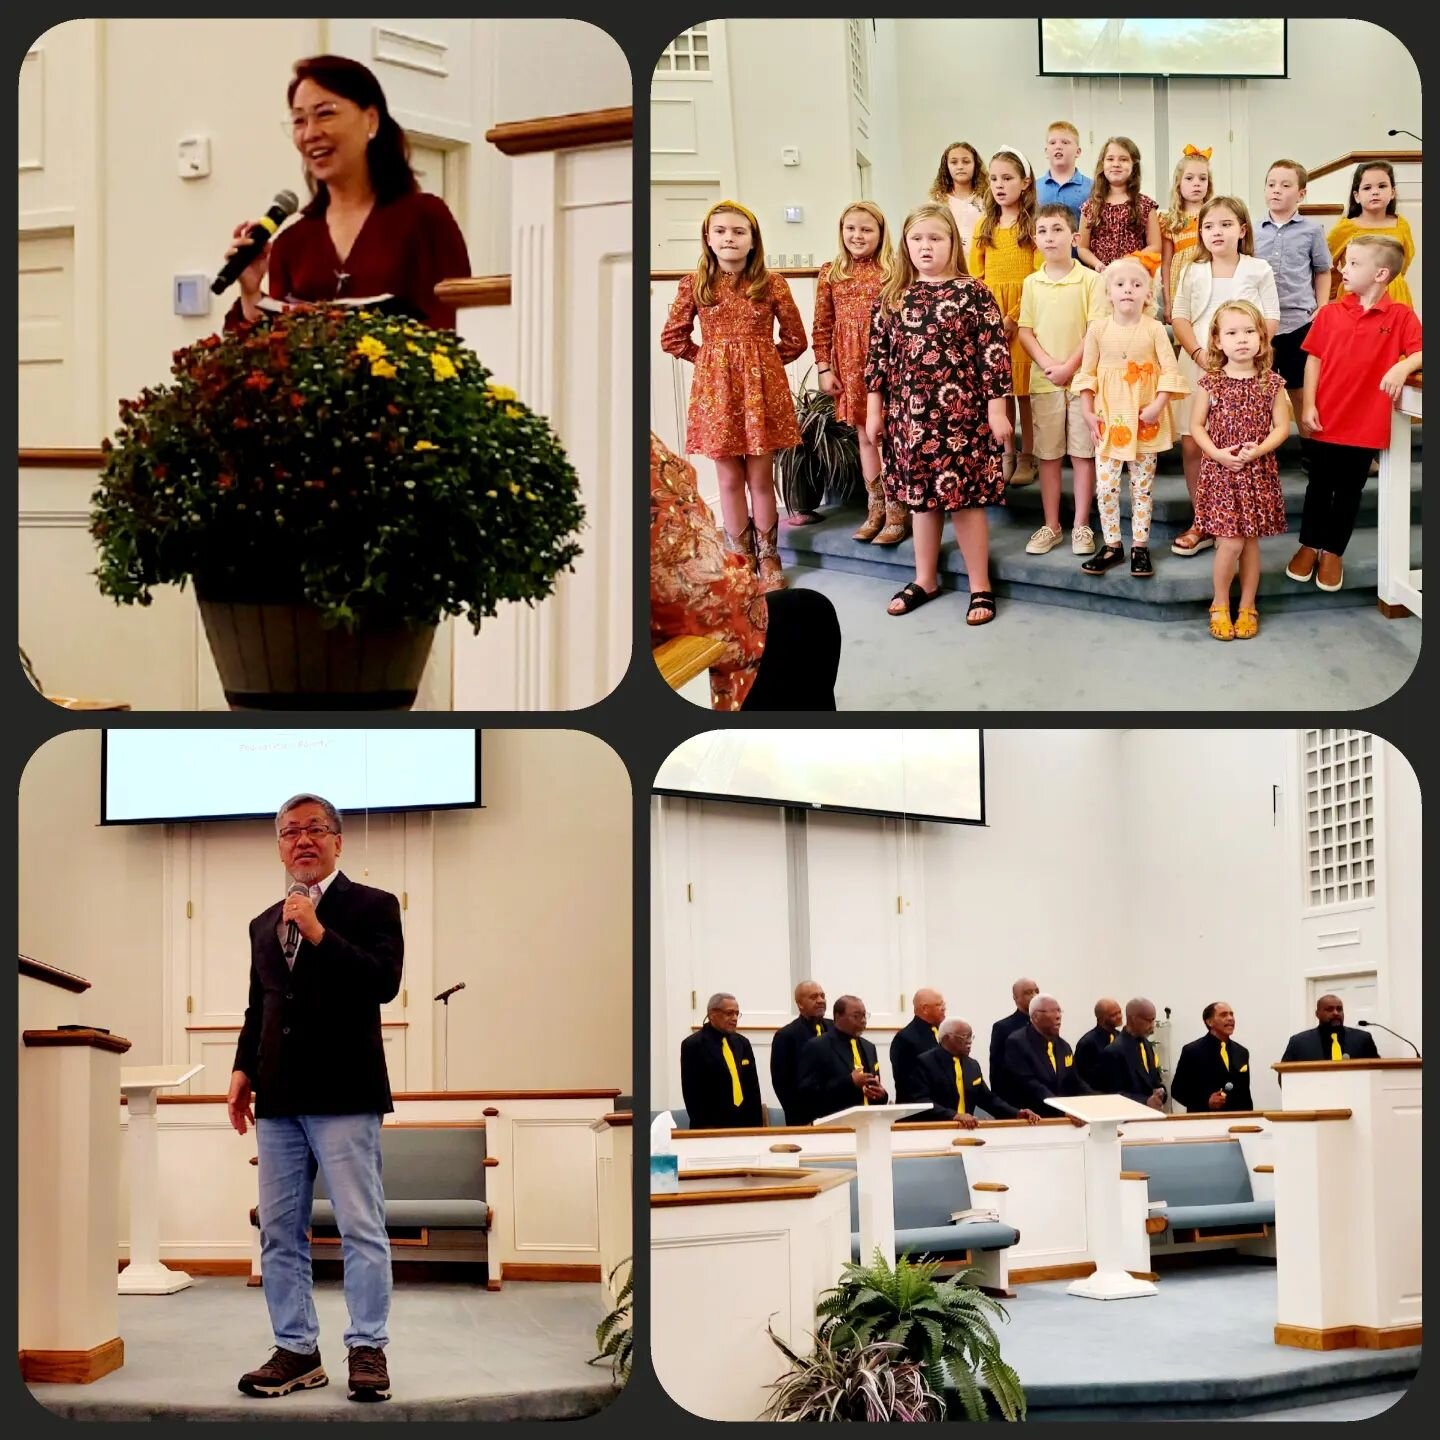 Our recent blessings!
Missionaries from @haggaiinternational and worshipping through music with our kids and the Men's Choir from First Missionary Baptist Church! 😊 ✝️ 👏 🙌